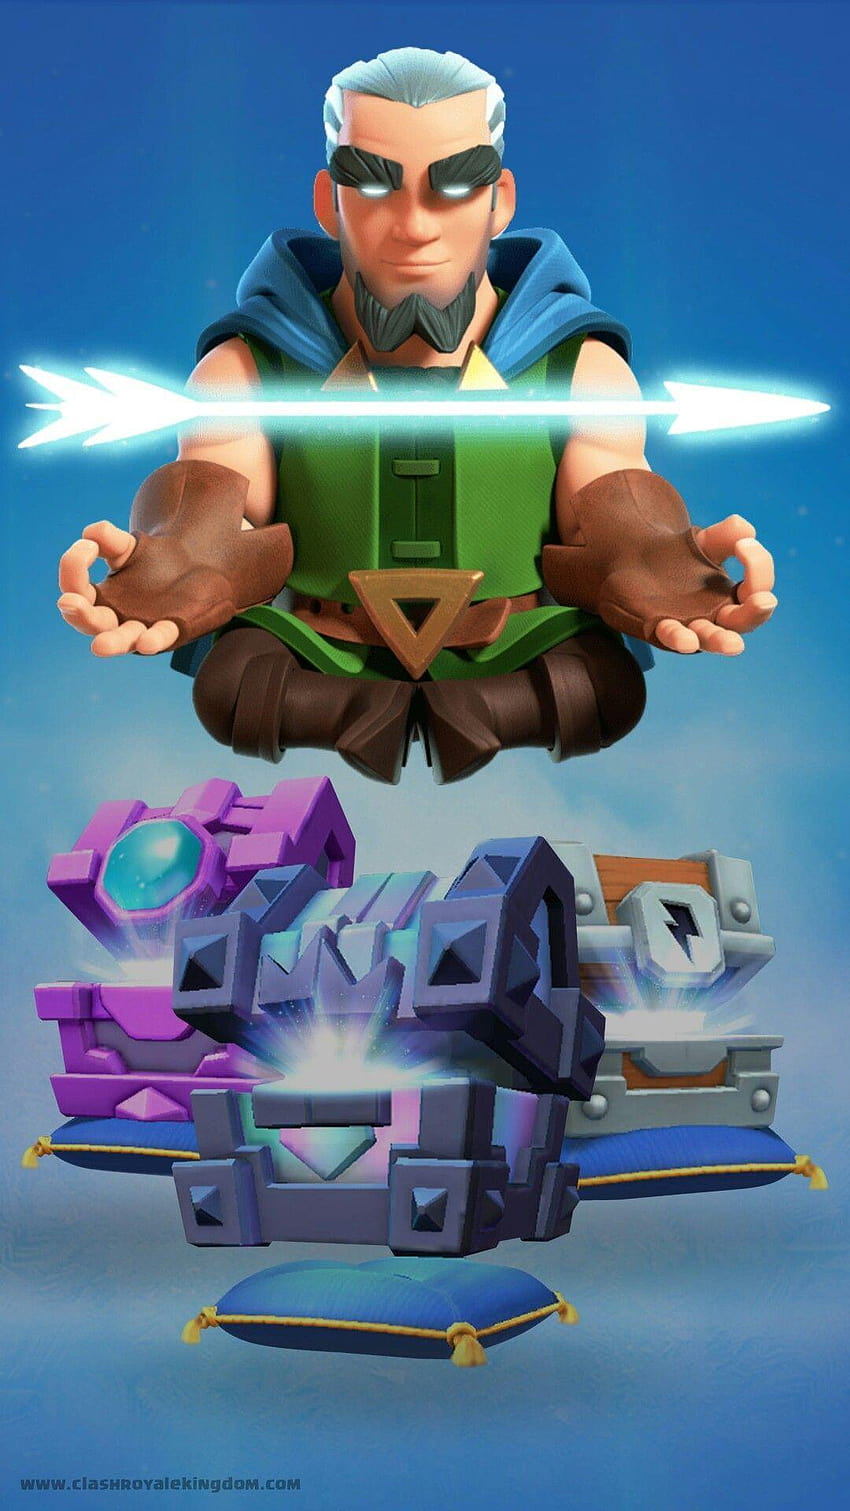 Magic archer chests Follow me before save, clash royale ice wizard HD phone wallpaper